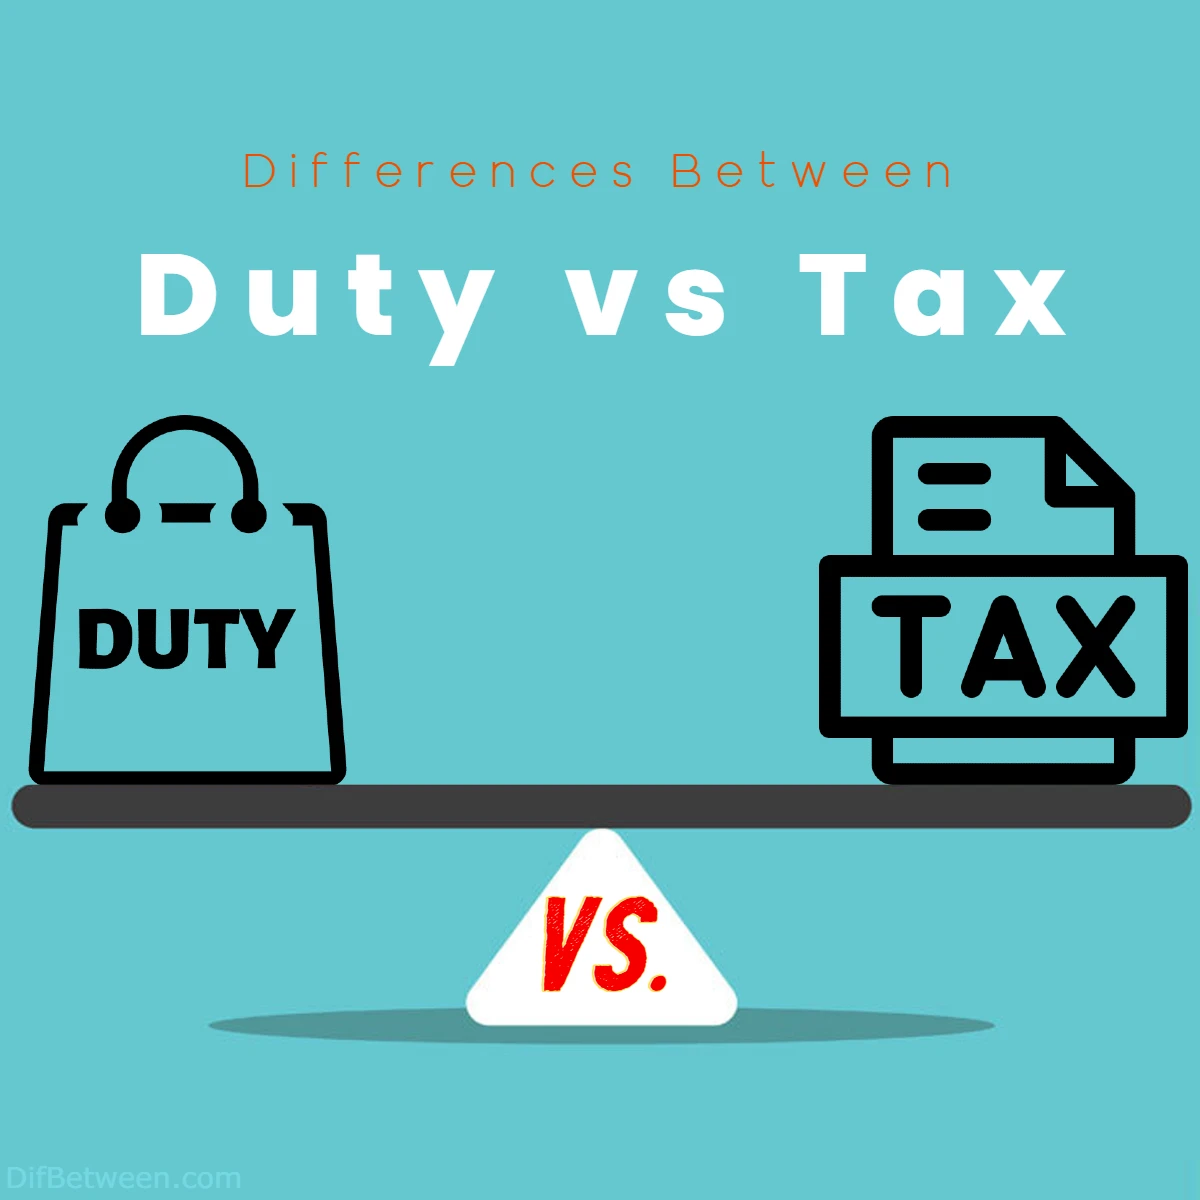 Differences Between Tax and Duty